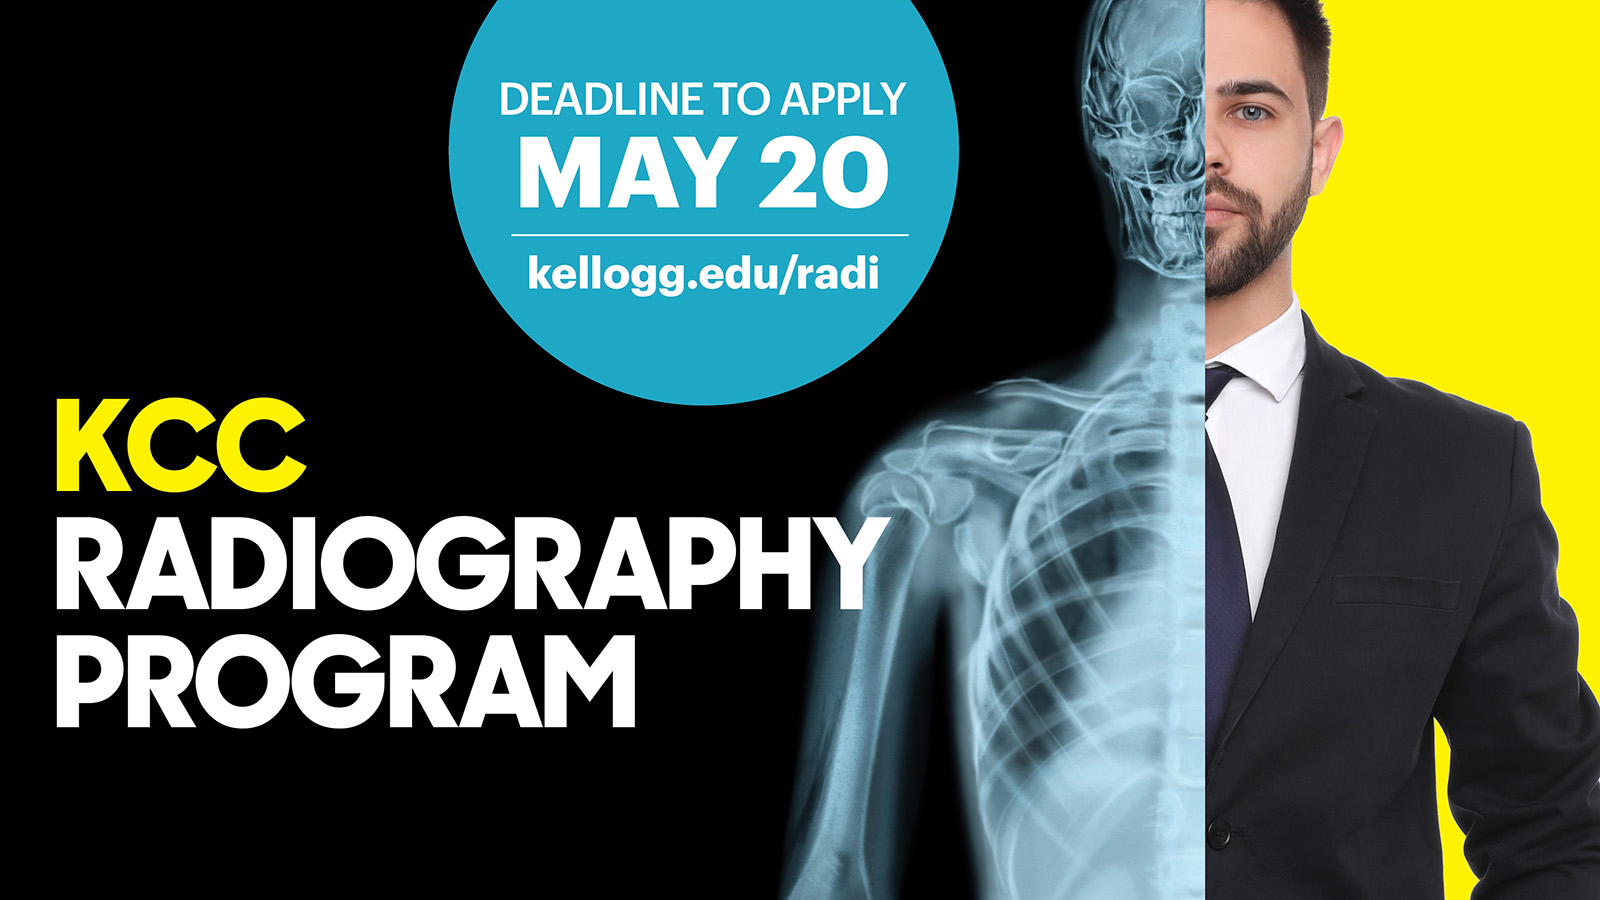 Man in a suit with half his body appearing as an X-ray skeleton, with text that reads, "KCC Radiography Program. Deadline to apply May 20. Kellogg.edu/radi."